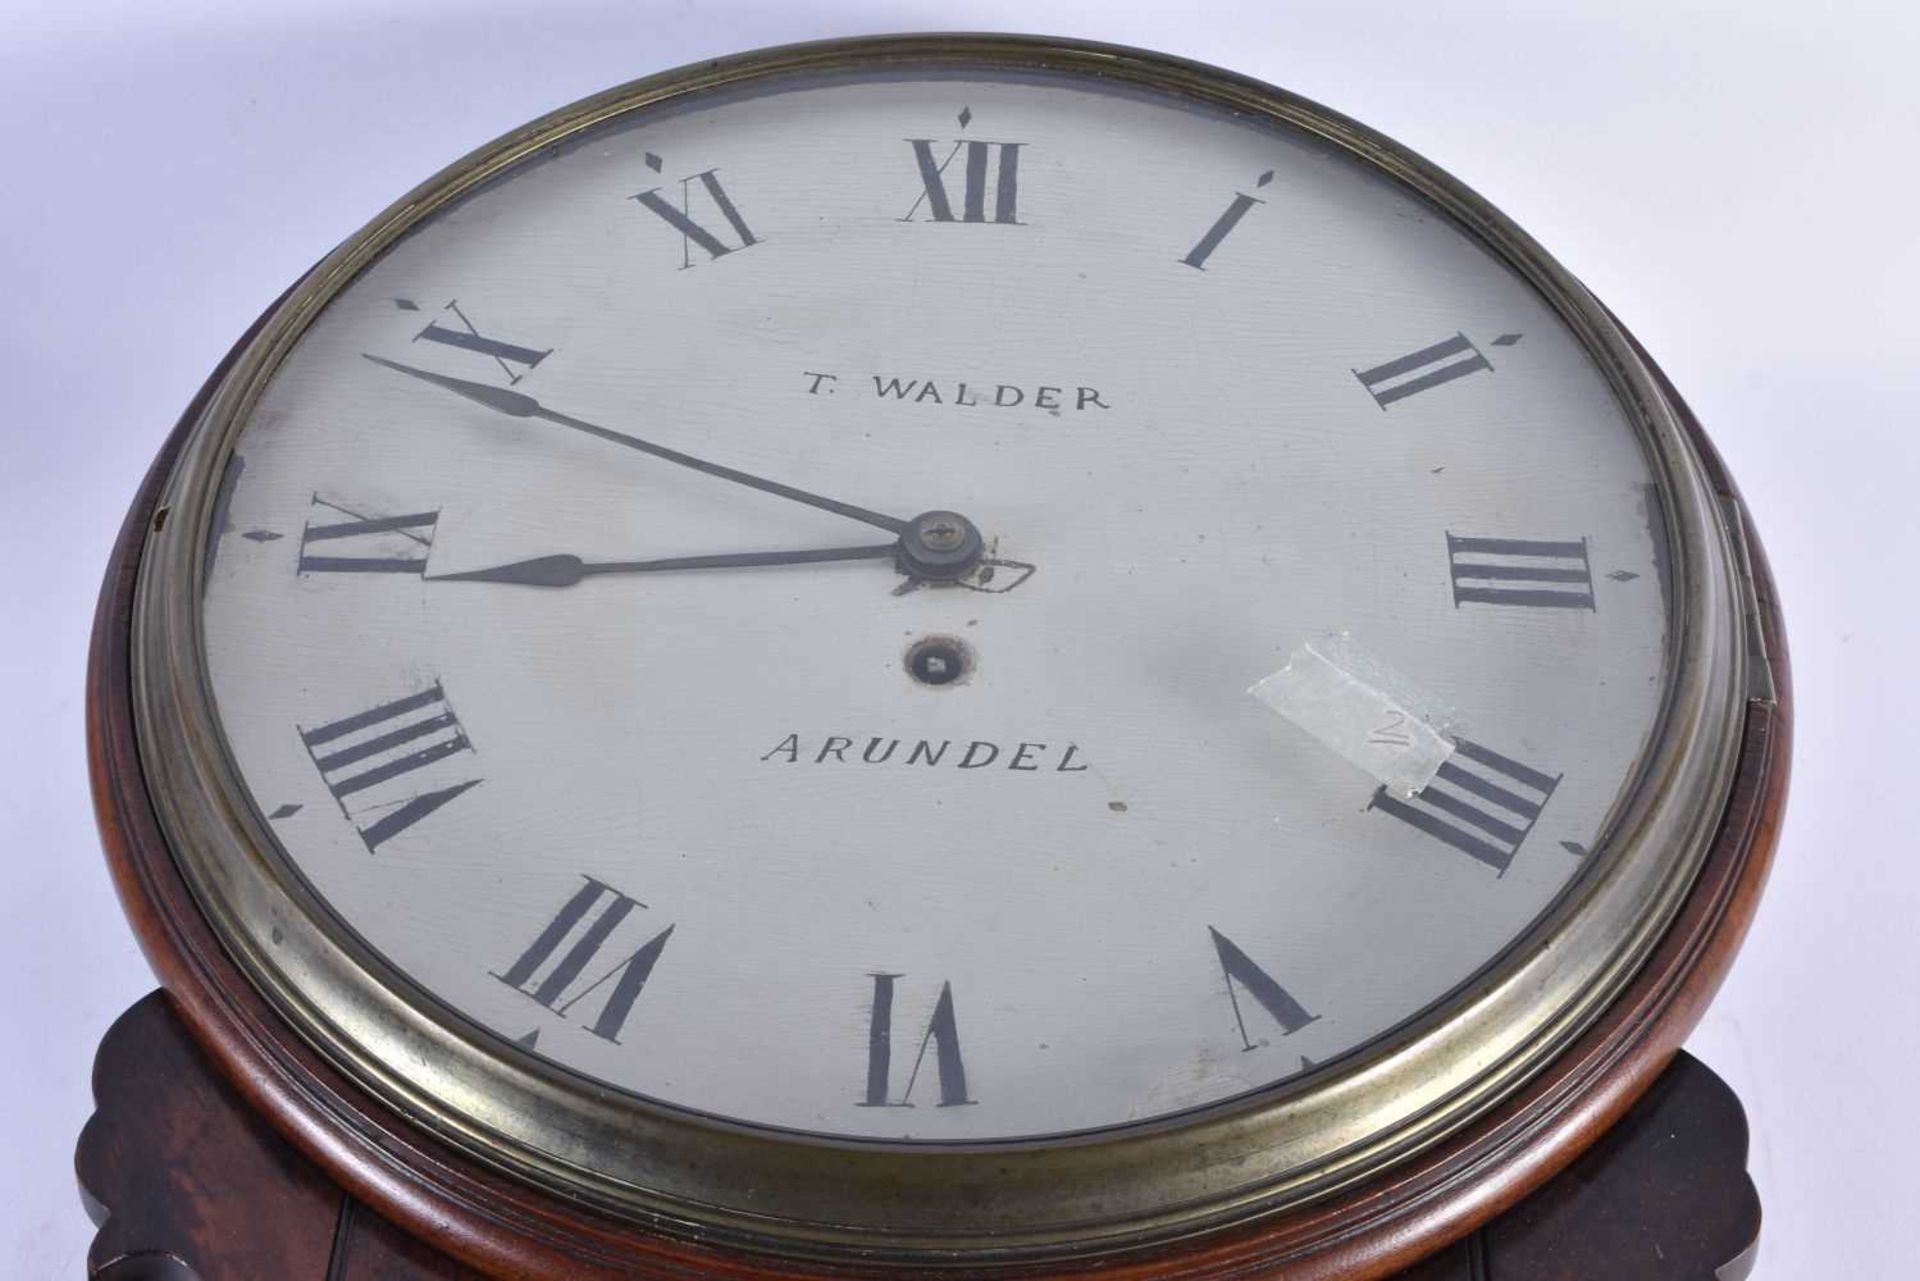 A RARE WOOD DIAL THOMAS WALDER OF ARUNDEL HANGING WALL CLOCK with black painted Roman numerals and - Image 2 of 19